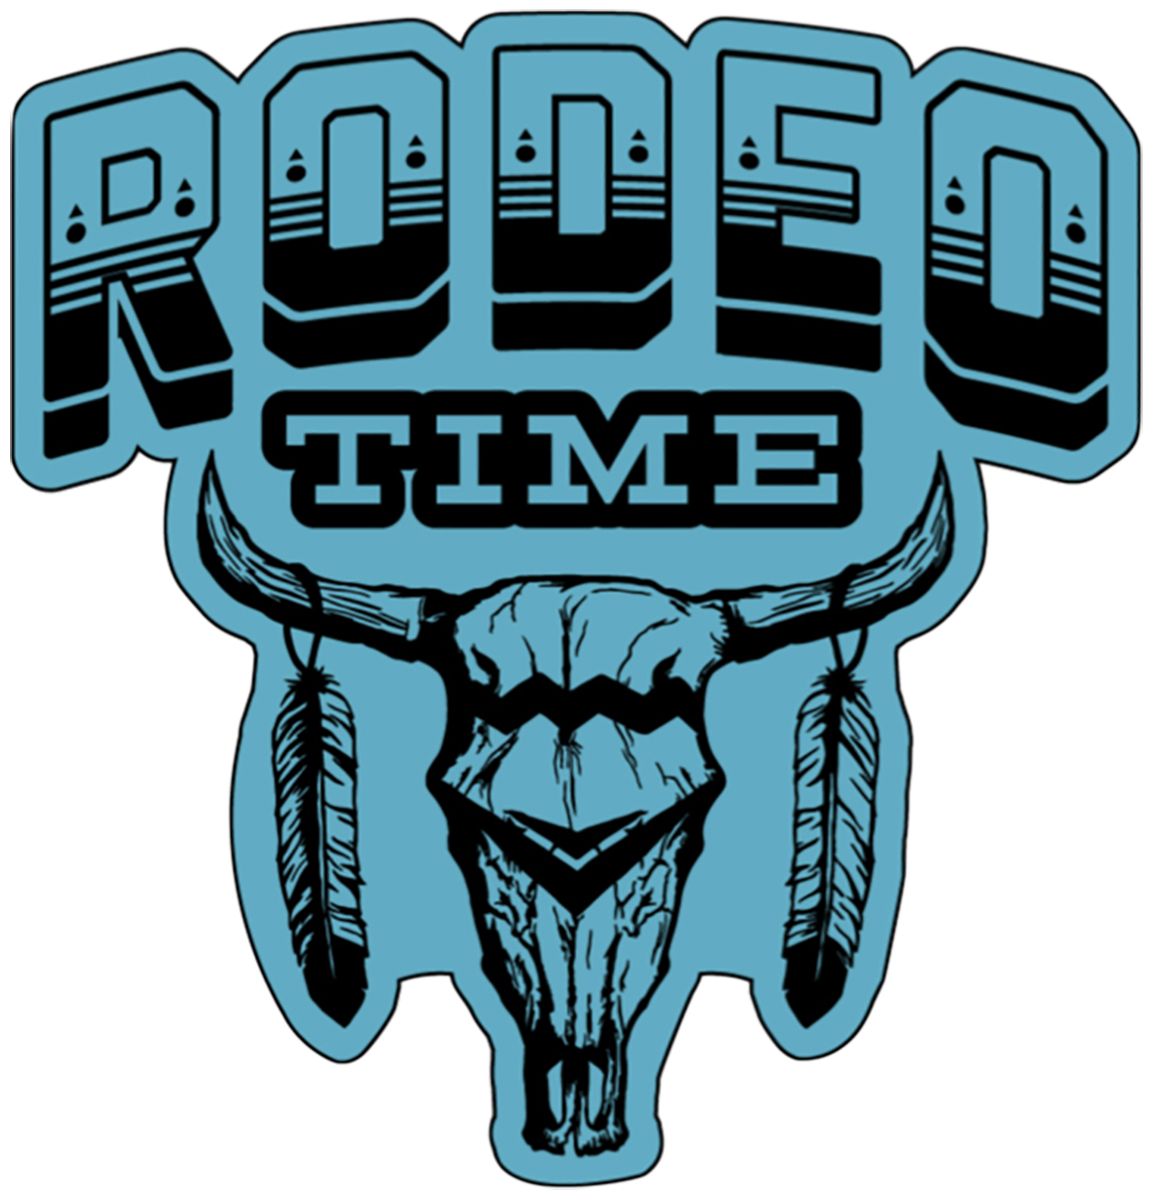 Dale Brisby Rodeo Time Decal x 4. Rodeo time, Rodeo shirts